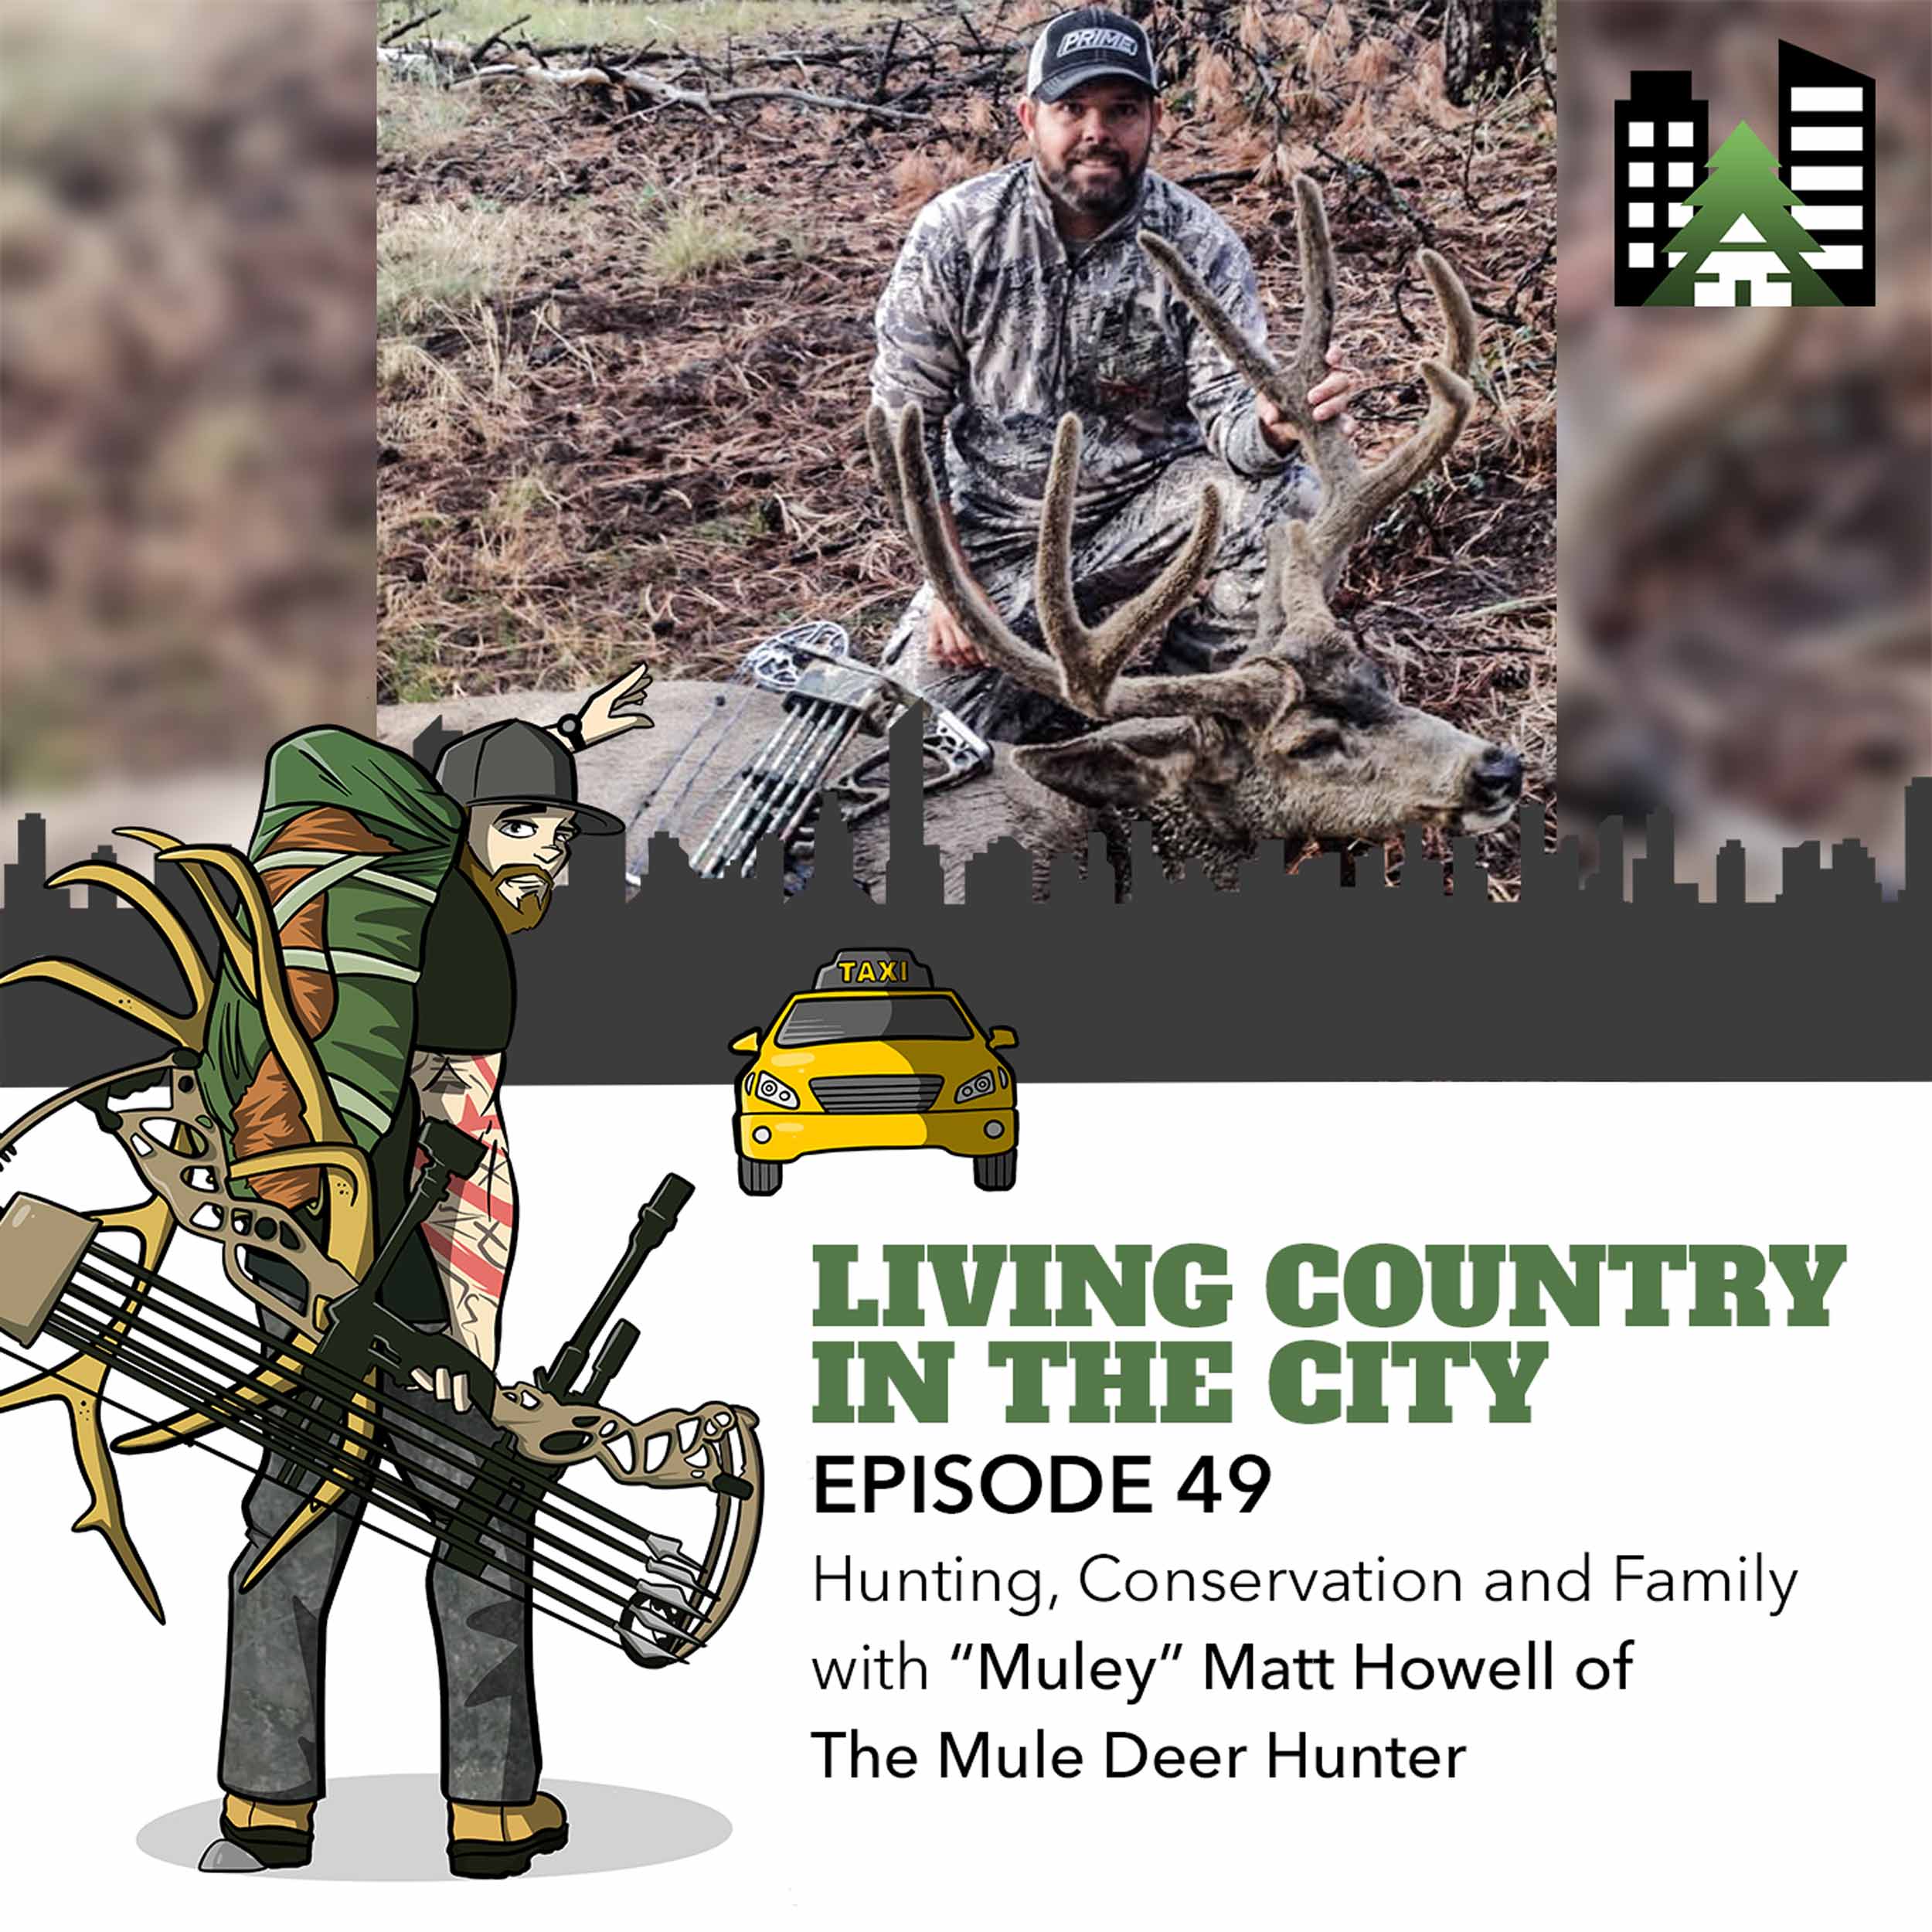 Ep 49 - Hunting, Conservation and Family with ”Muley” Matt Howell of The Mule Deer Hunter